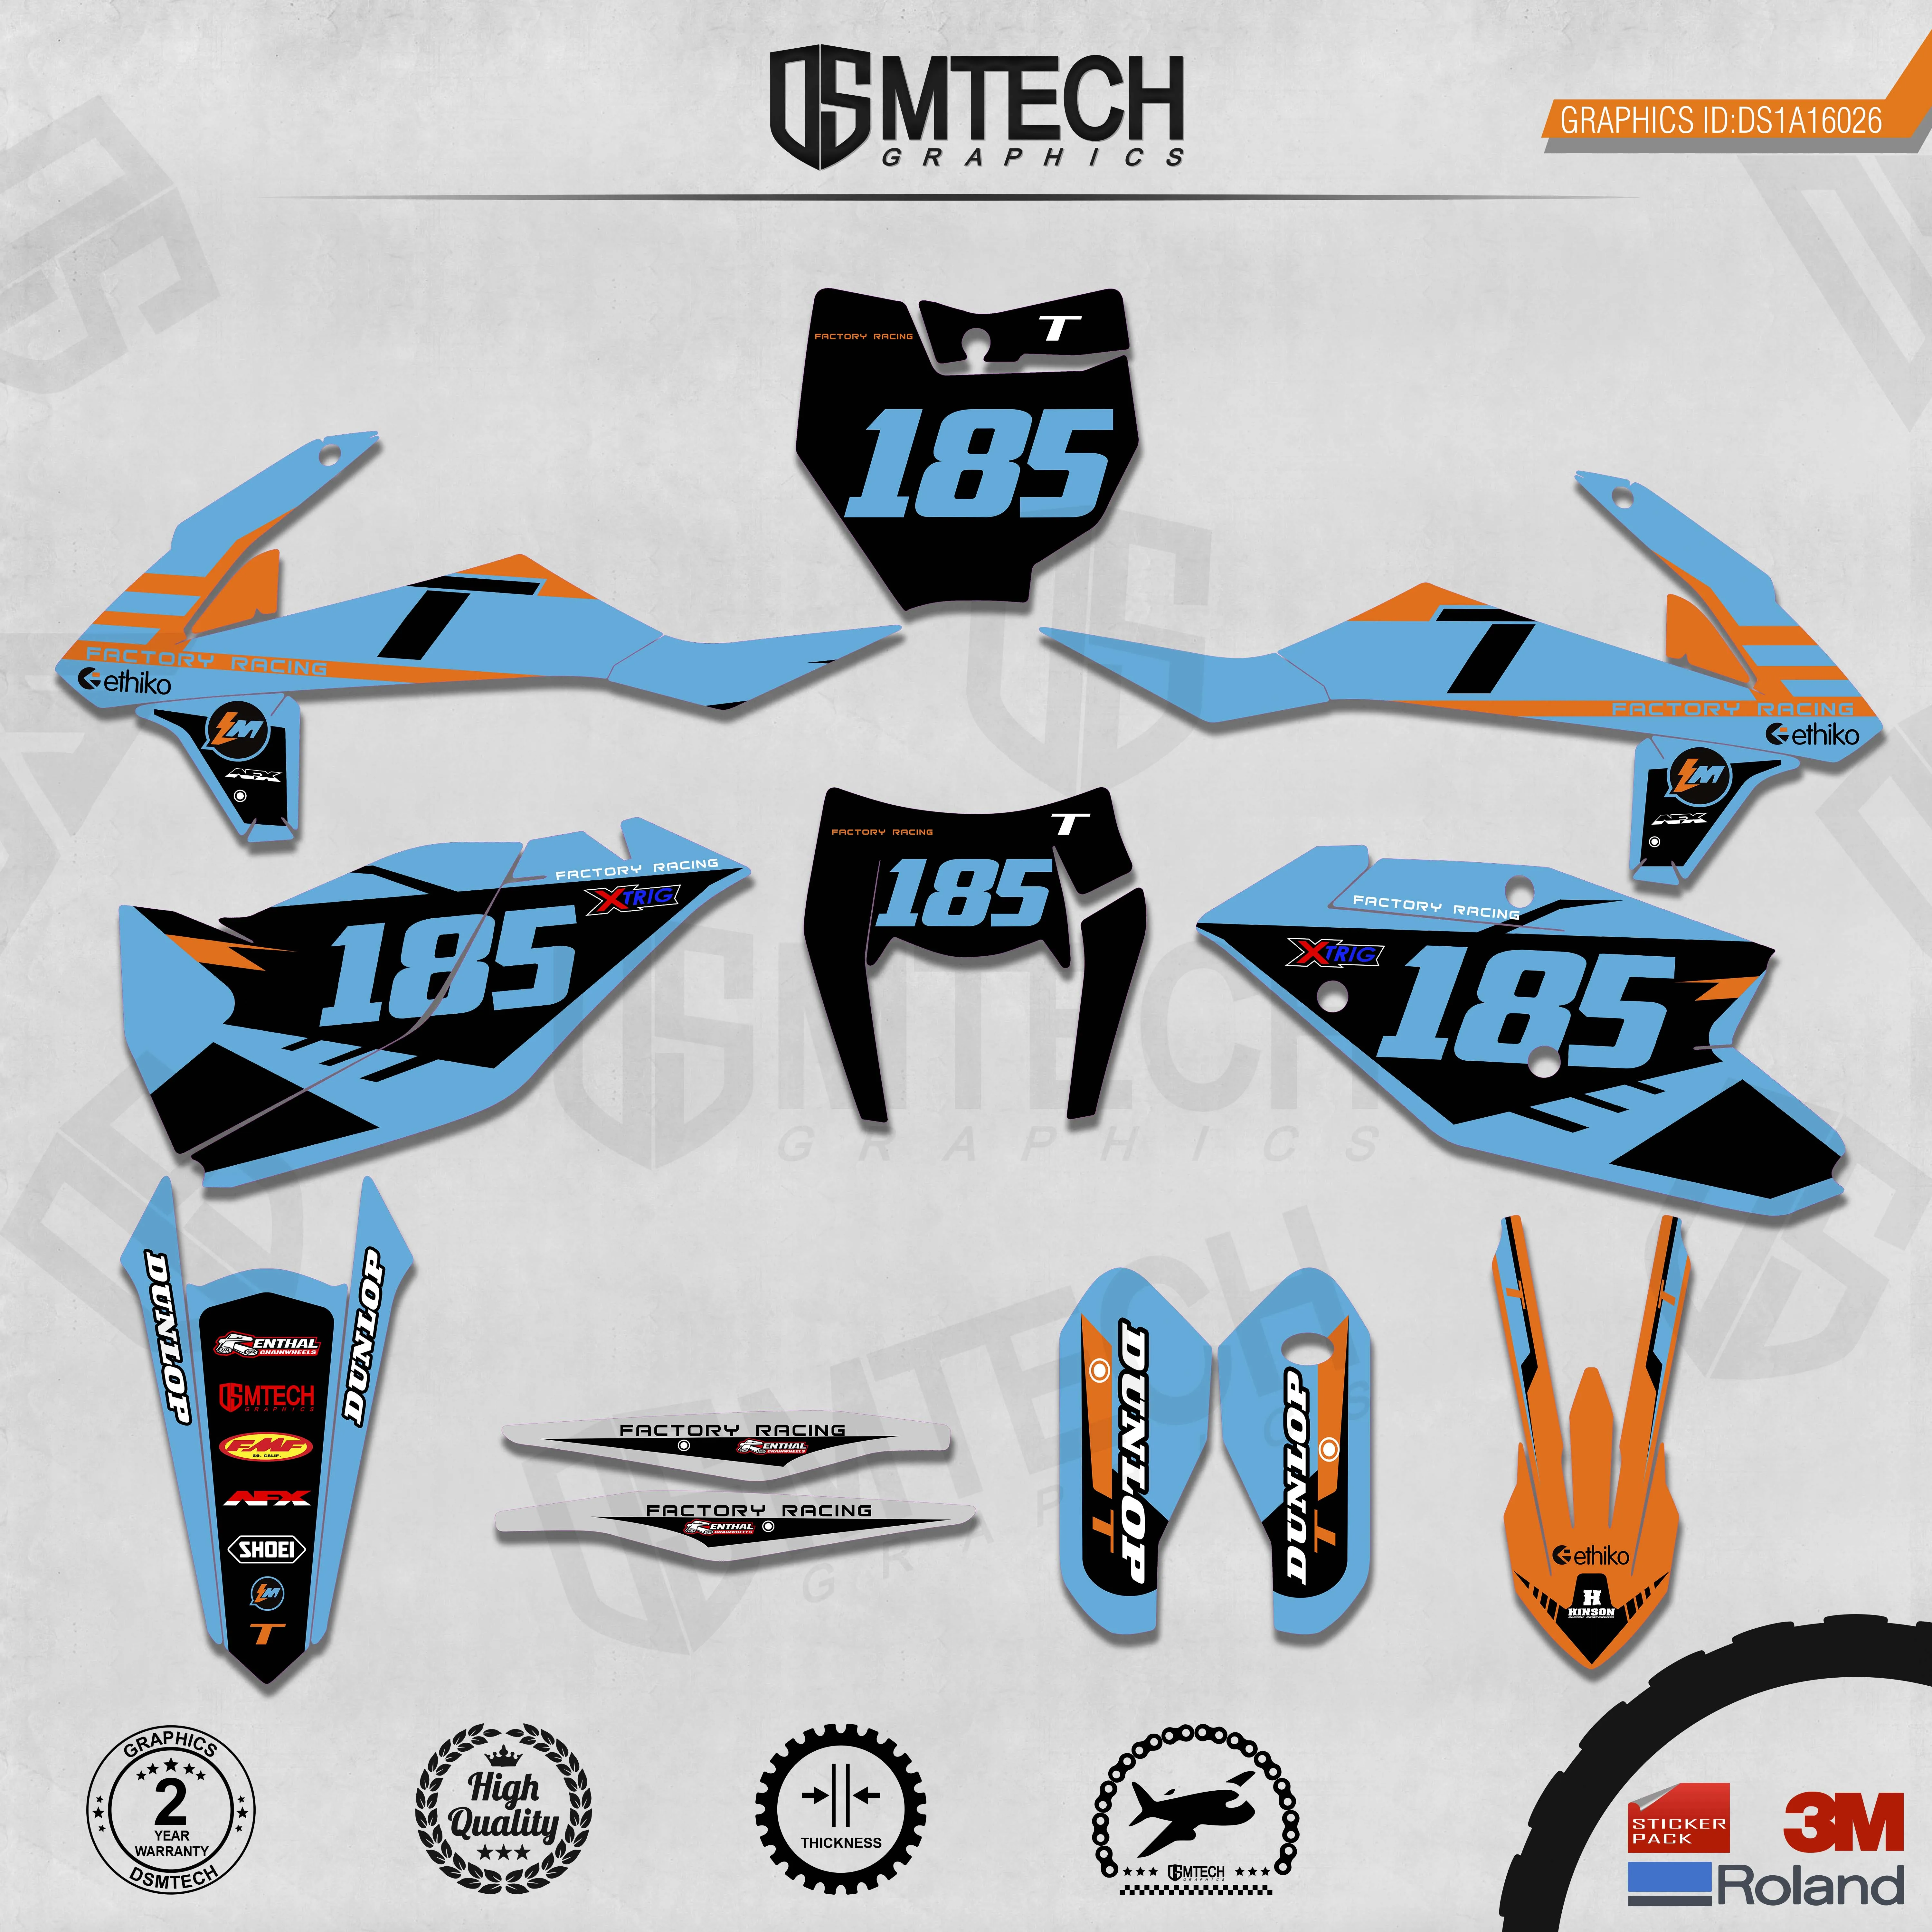 DSMTECH Customized Team Graphics Backgrounds Decals 3M Custom Stickers For KTM 2017-2019 EXC 2016-2018 SXF  026